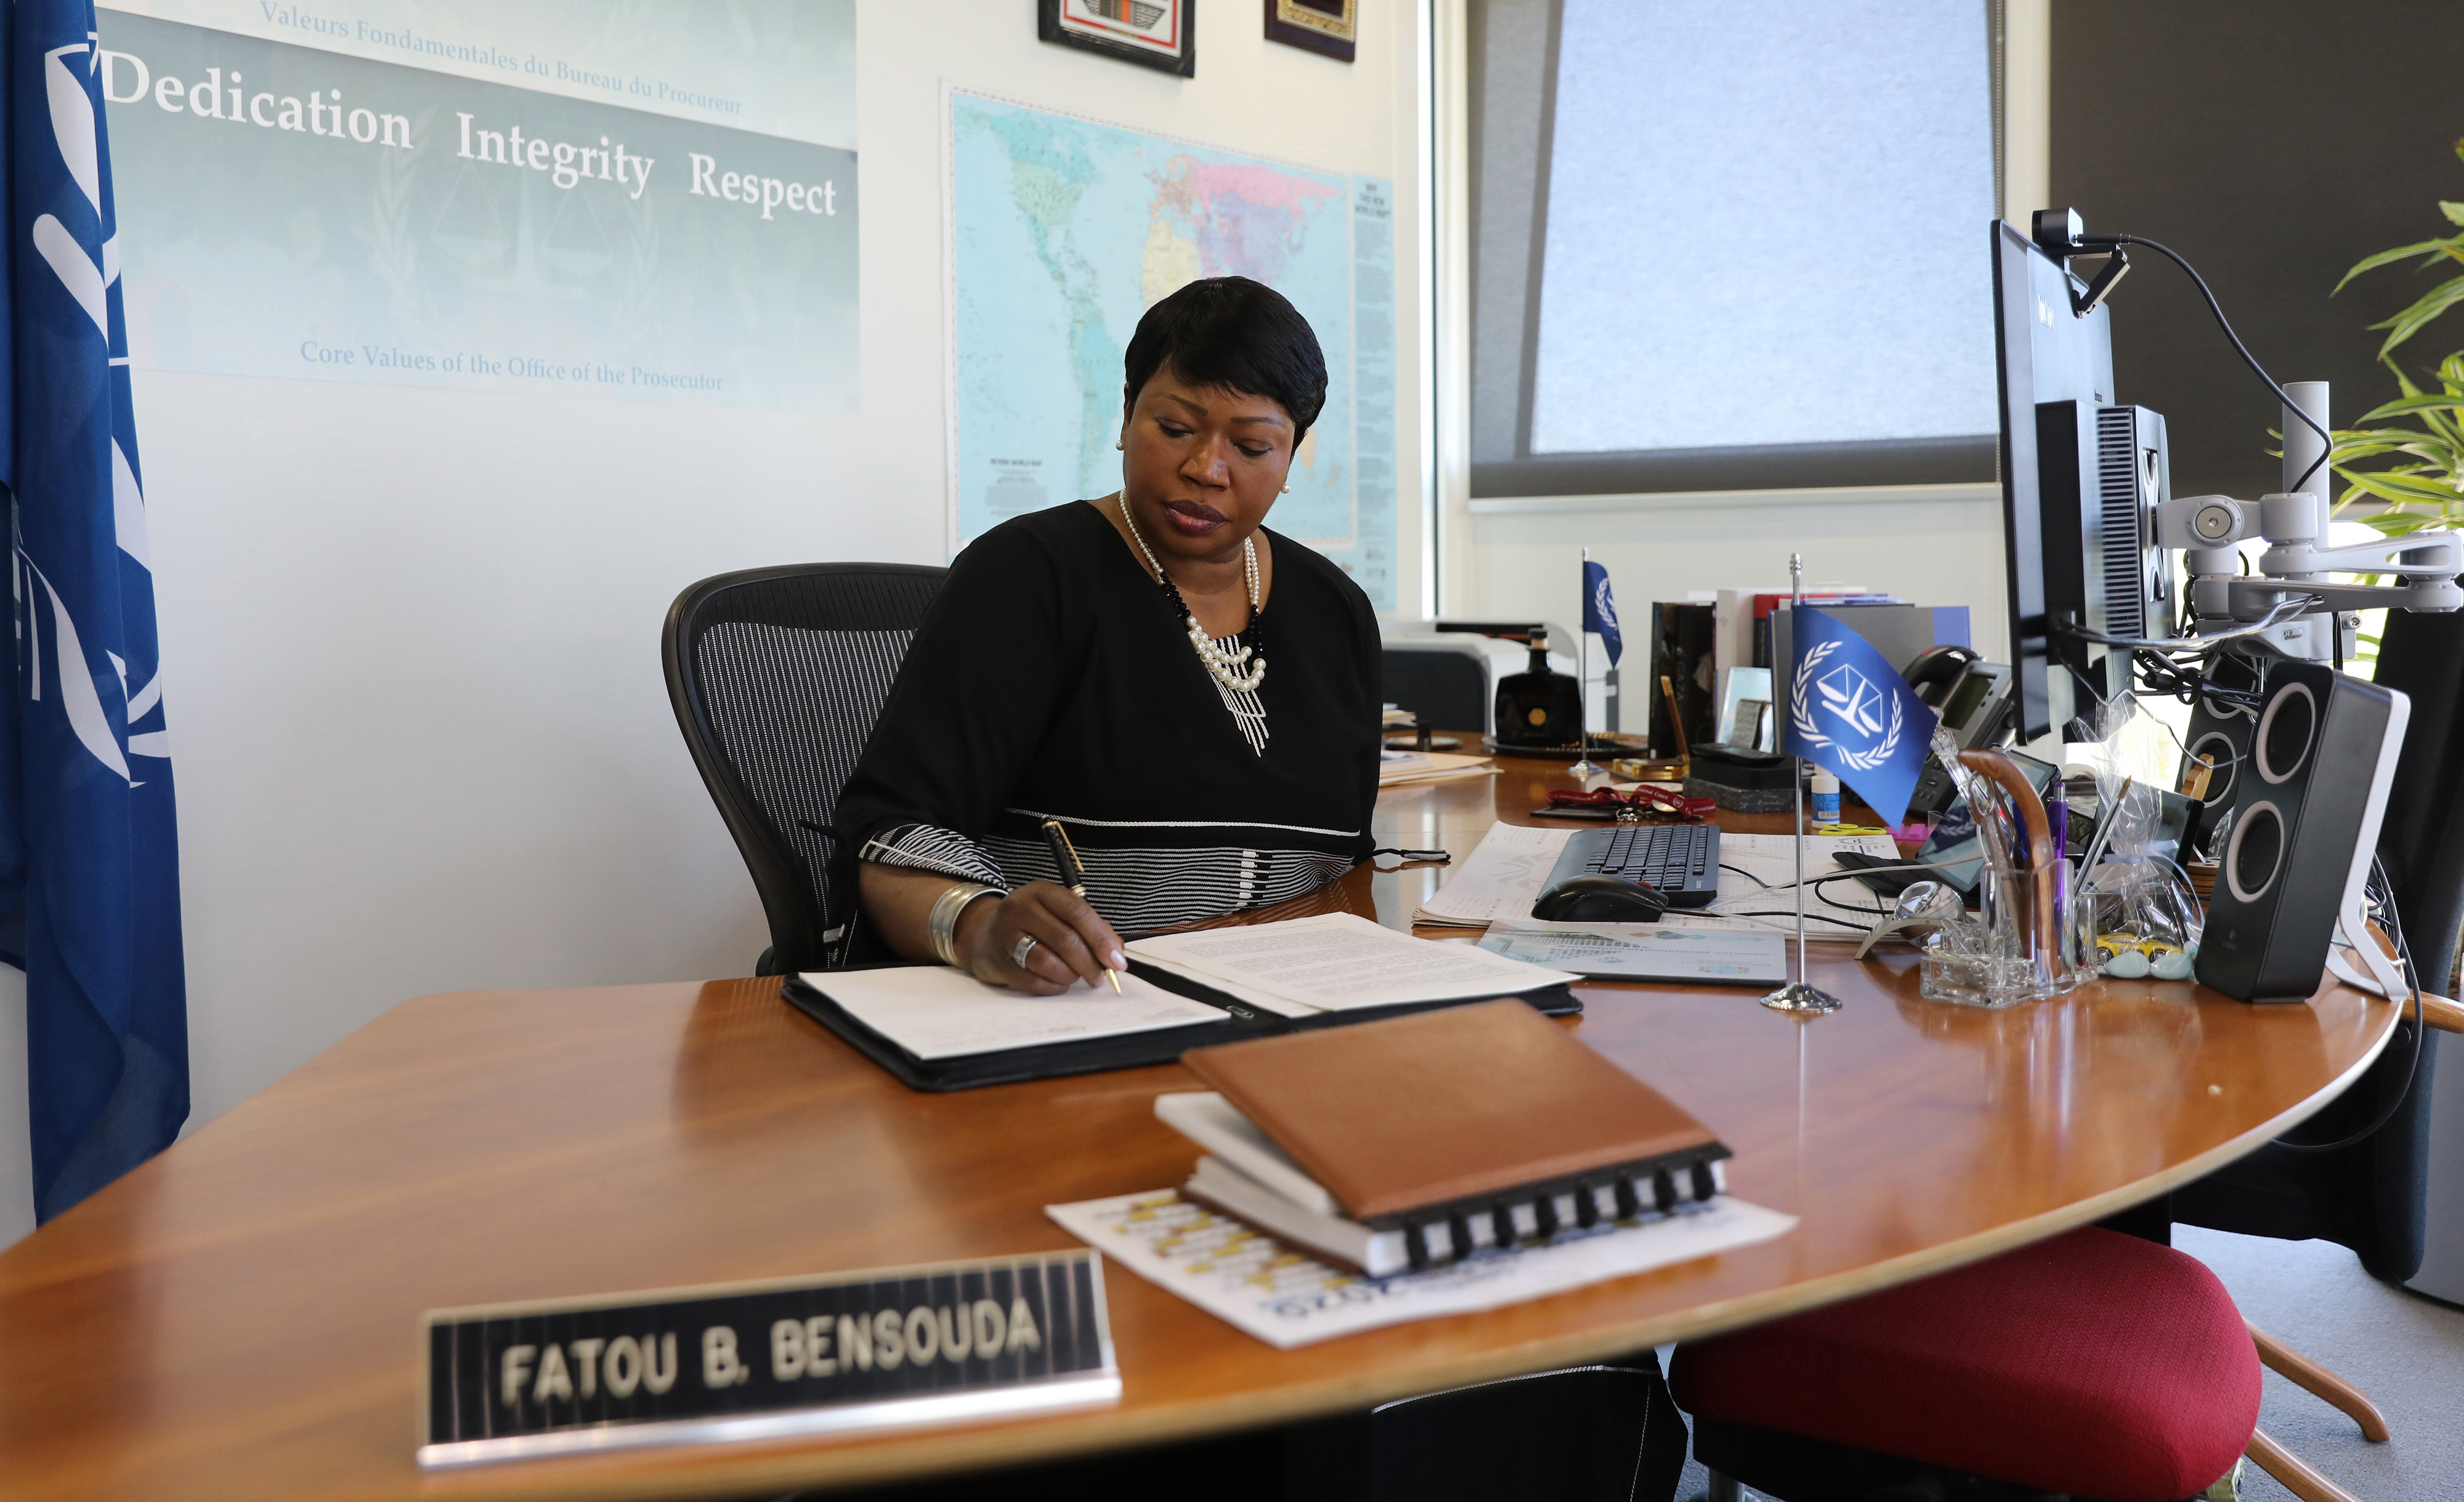 Due to COVID-19 lockdown at the UN headquarters, ICC Prosecutor, Fatou Bensouda, presents her Office’s 19th report onthe Situation in Libya remotely through VTC. ©ICC-CPI